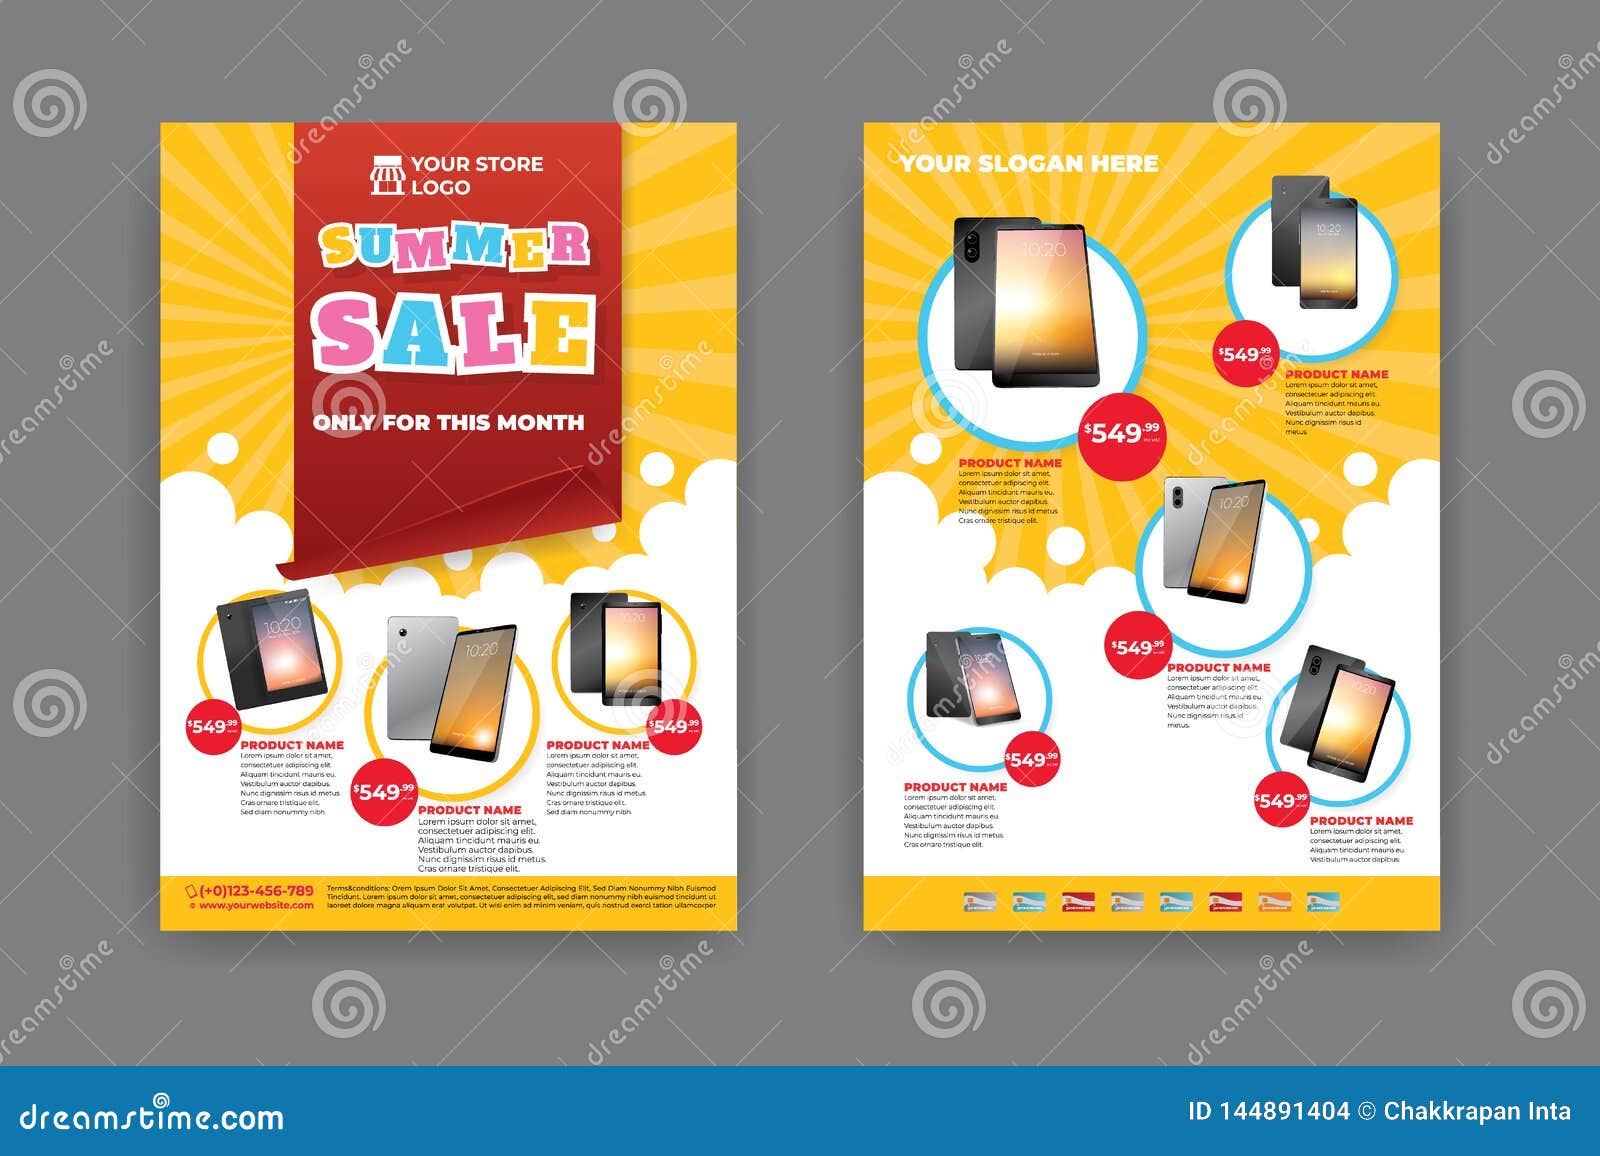 20 Sides Flyer Template for Summer Sale Promotion Stock Vector Pertaining To Product Promotion Flyer Template